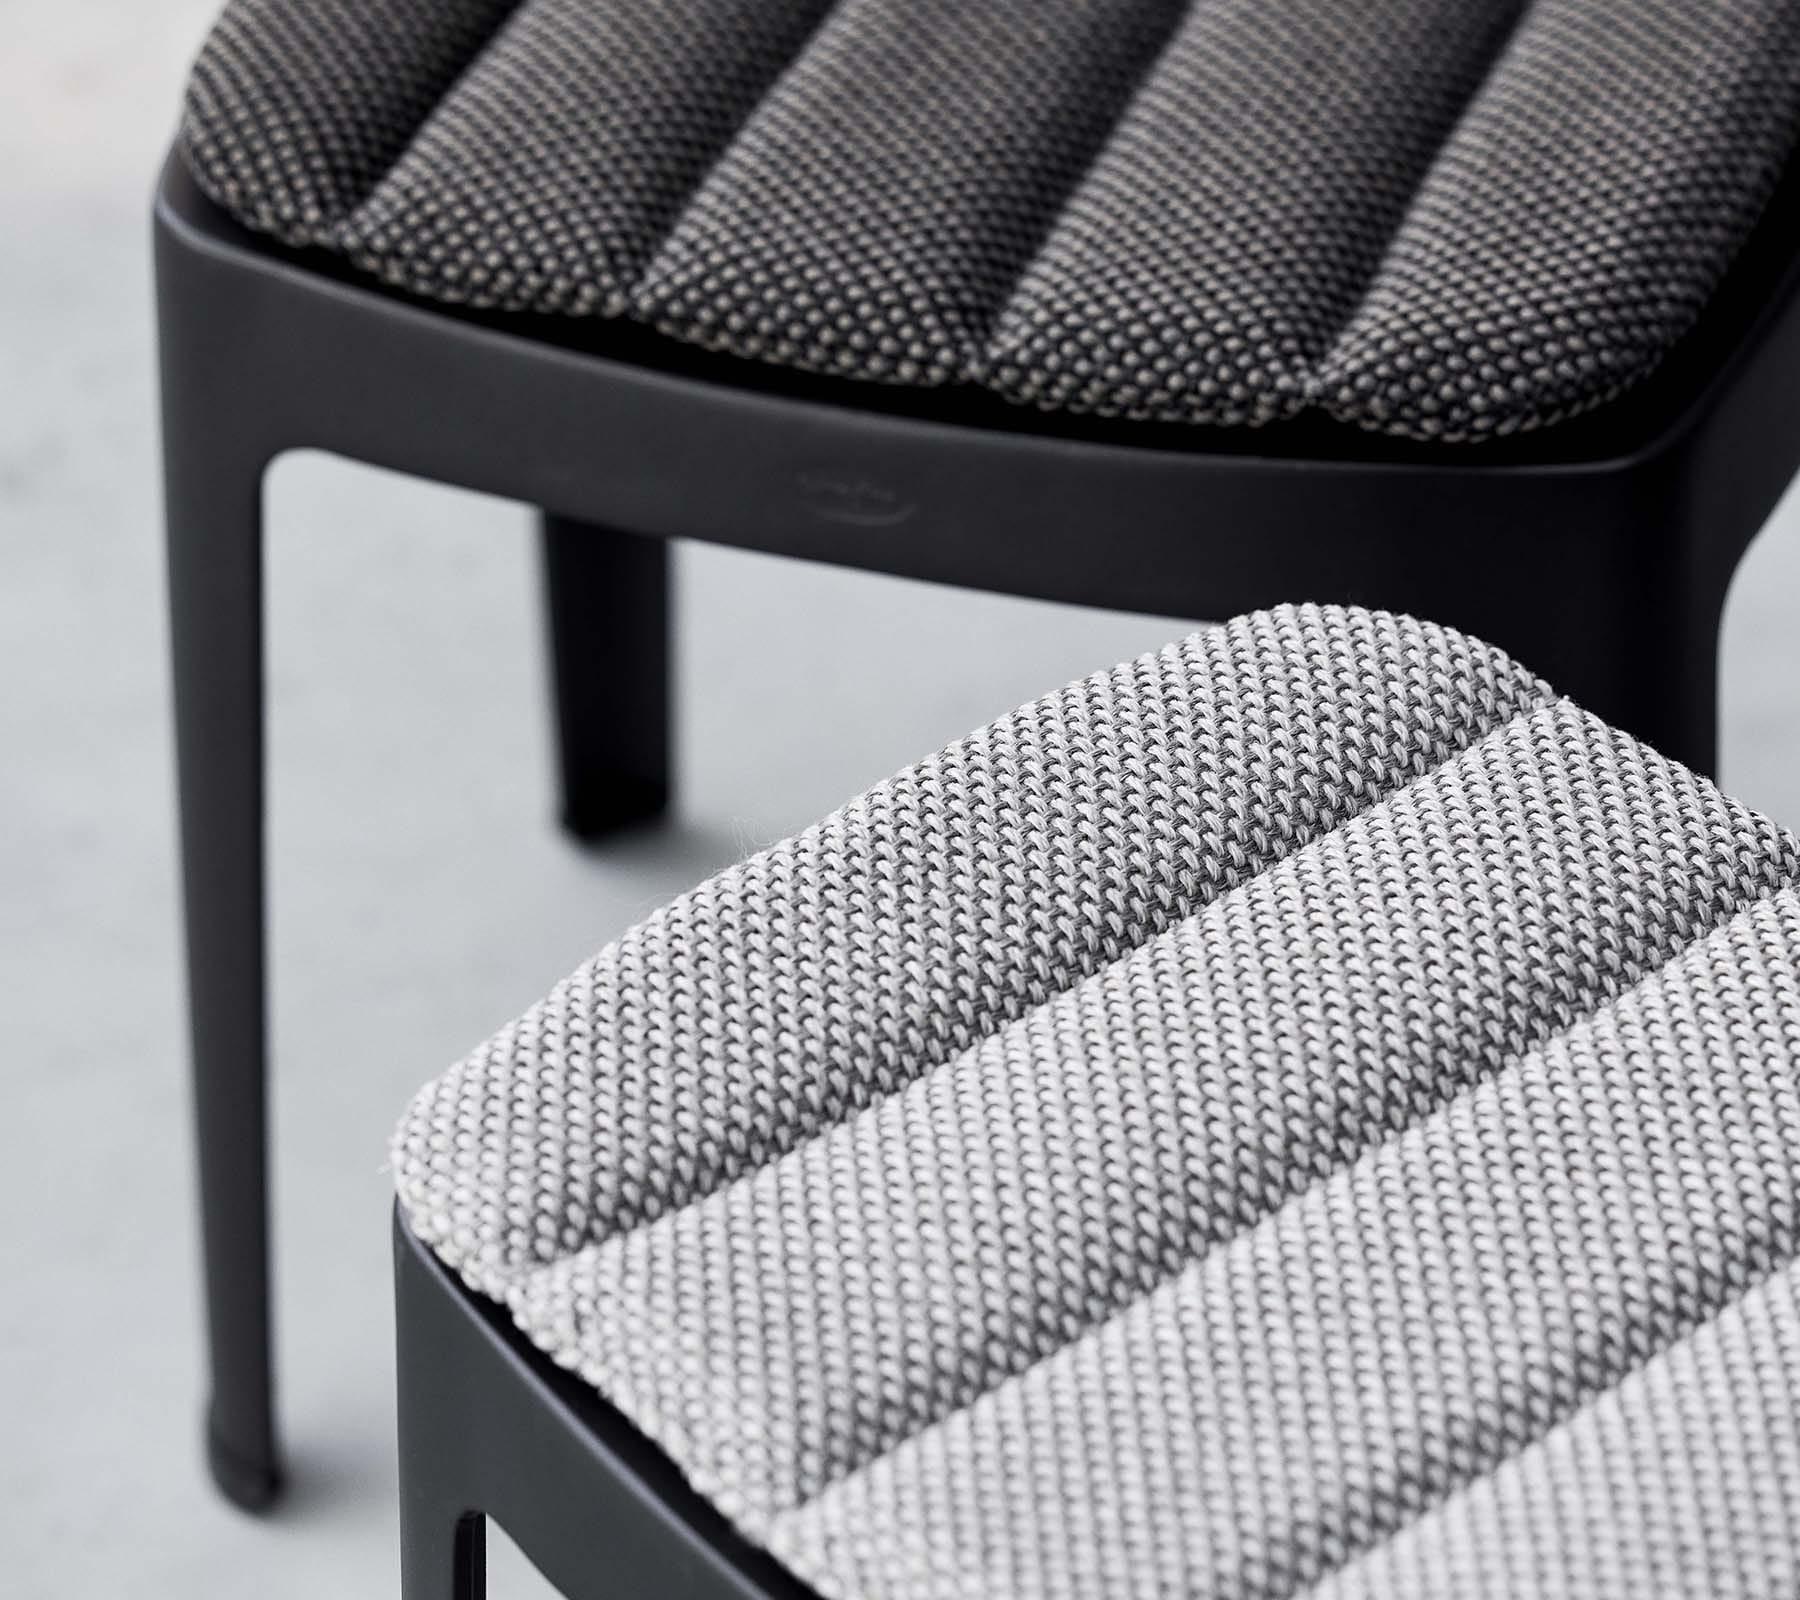 Boxhill's Cut High Outdoor Stool Black with Dark Grey and Light Grey cushion close up view